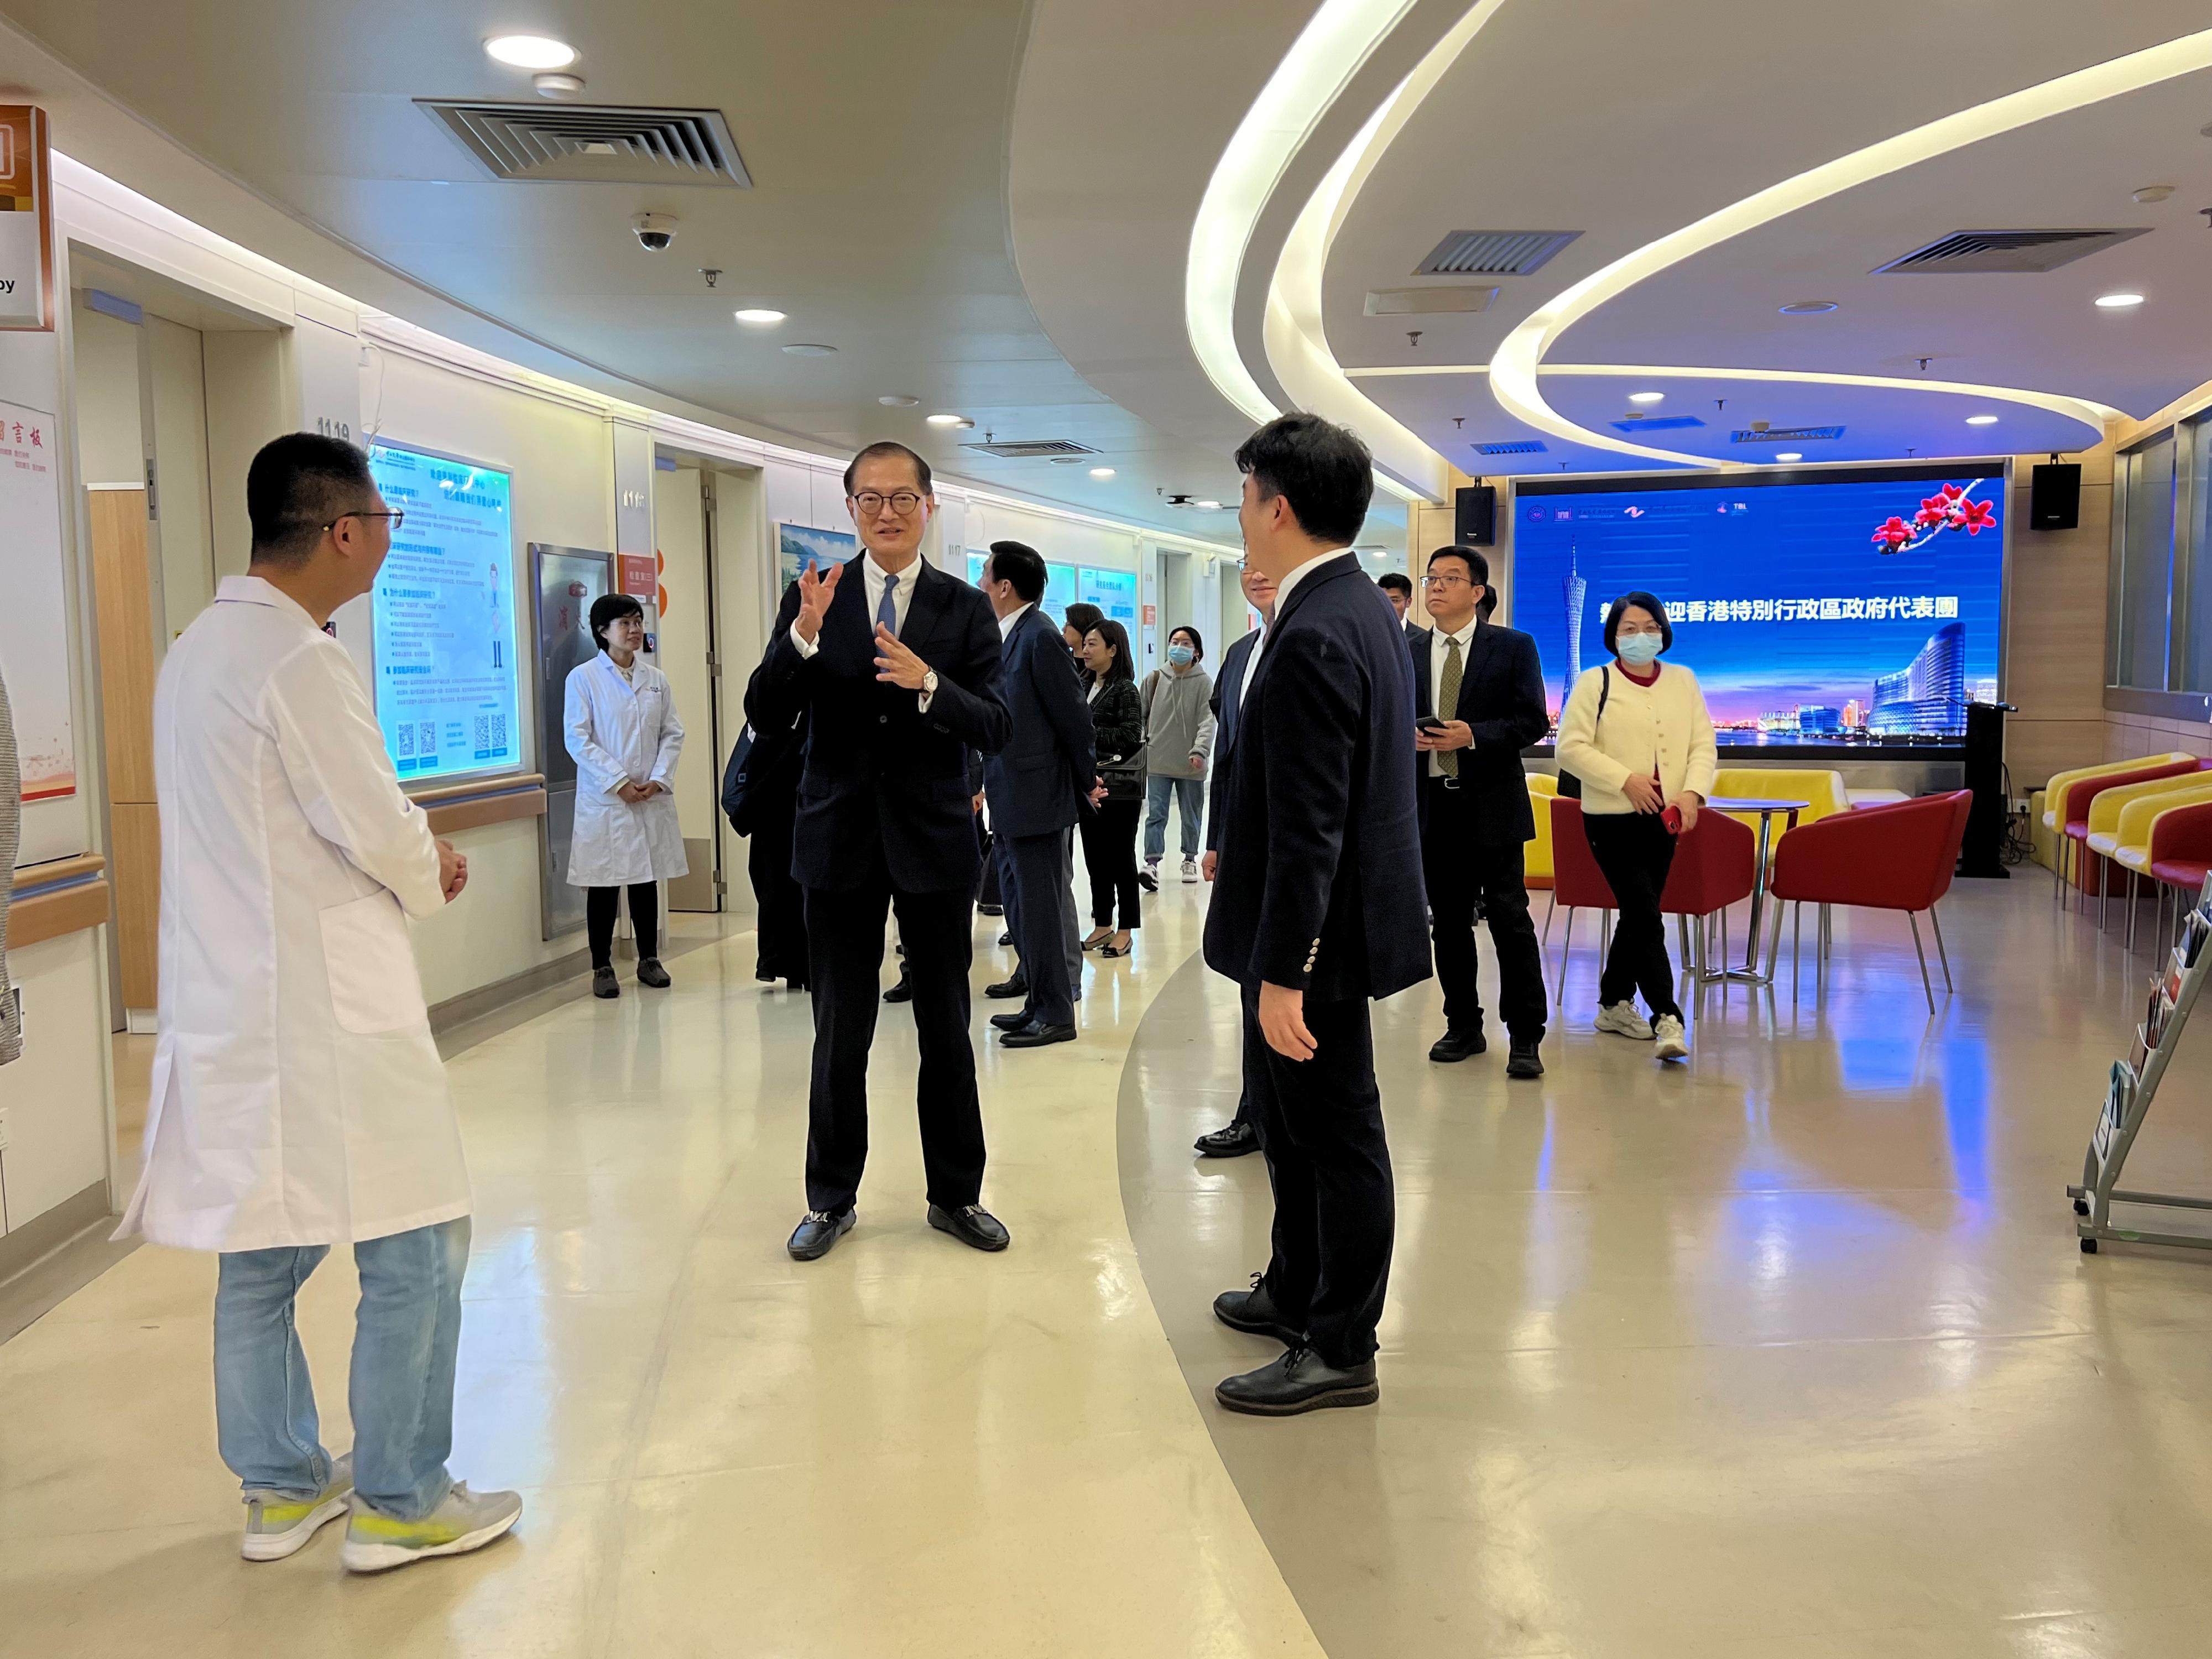 The Secretary for Health, Professor Lo Chung-mau, and his delegation visited the Zhongshan Ophthalmic Center of Sun Yat-sen University in Guangzhou today (March 13). Photo shows Professor Lo (second left) chatting with staff members of the Center.
